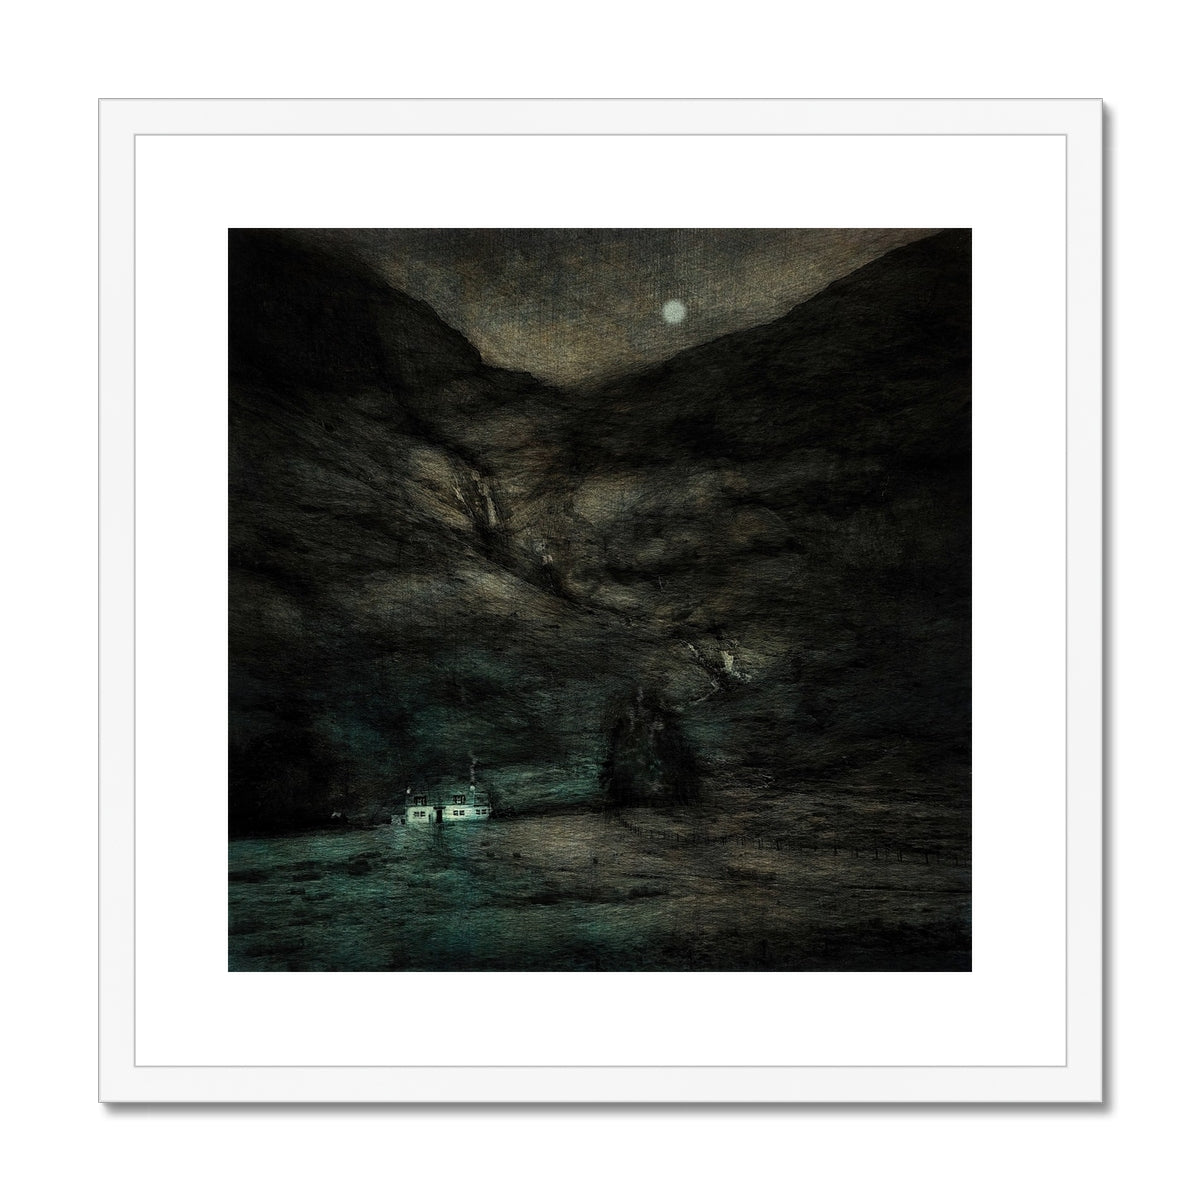 Glencoe Cottage Moonlight Painting | Framed & Mounted Prints From Scotland-Framed & Mounted Prints-Glencoe Art Gallery-20"x20"-White Frame-Paintings, Prints, Homeware, Art Gifts From Scotland By Scottish Artist Kevin Hunter